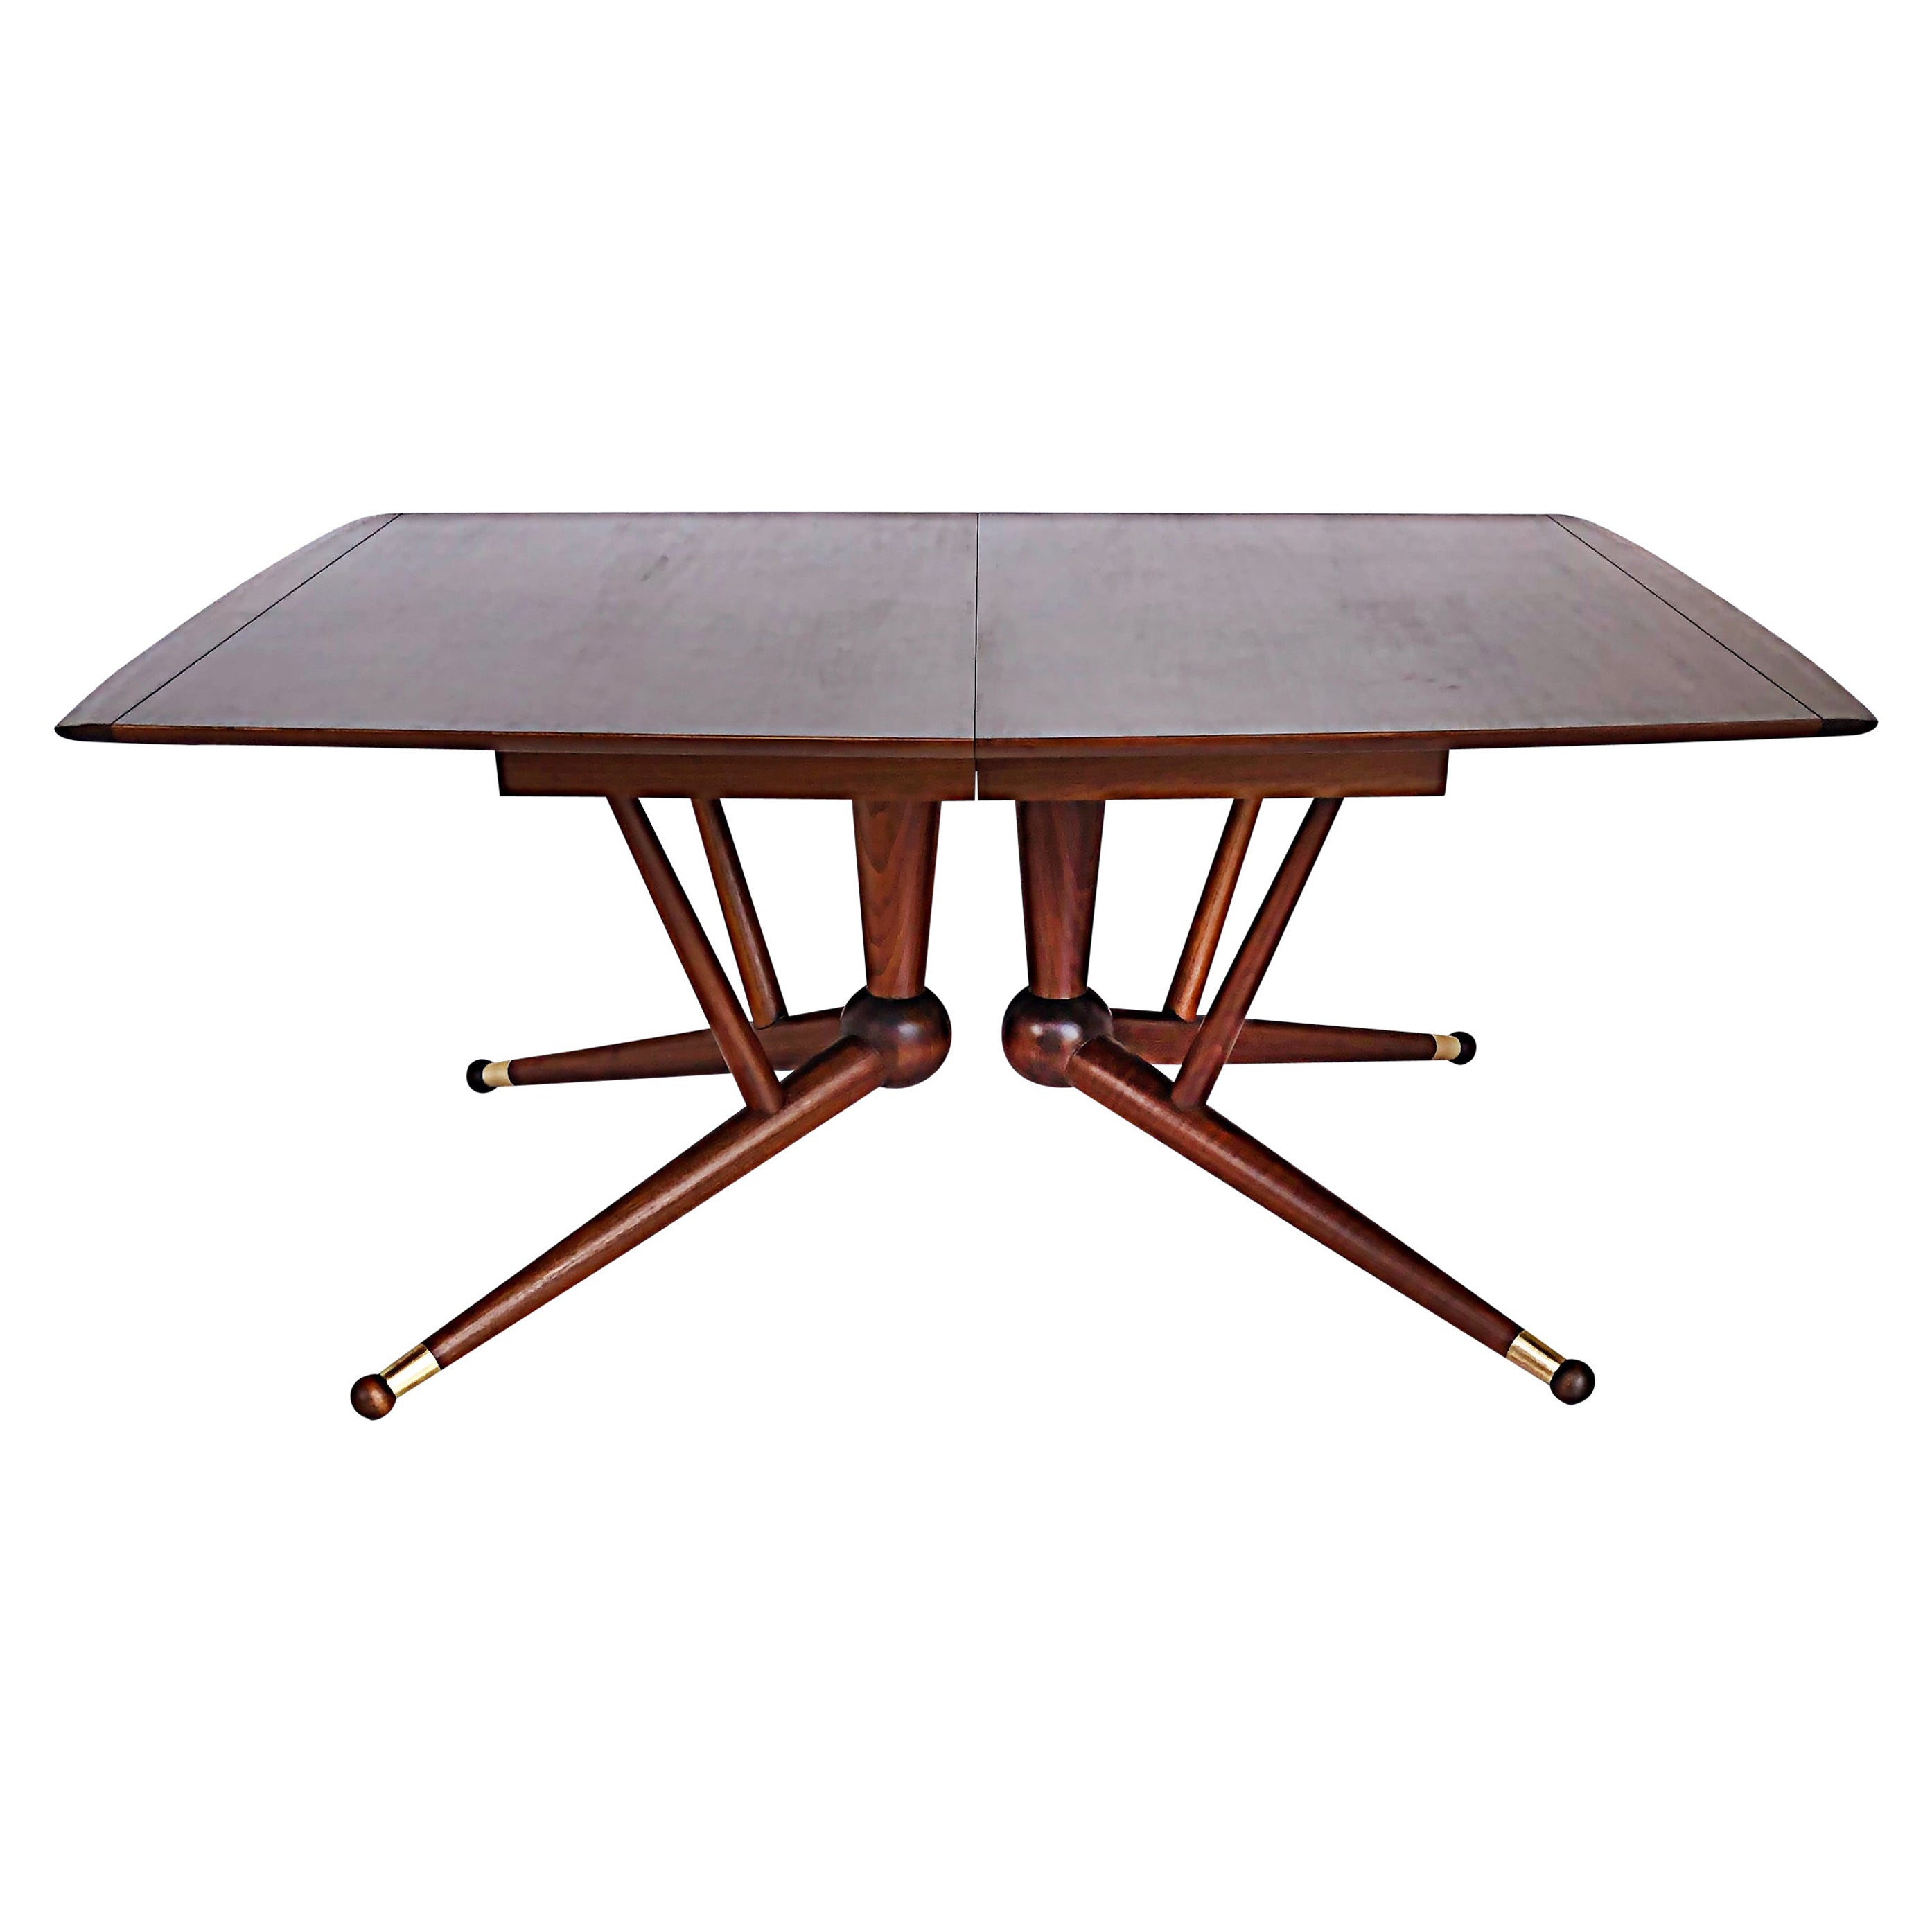 American Mid-Century Modernist Expandable Dining Table with Two Wood Leaves For Sale